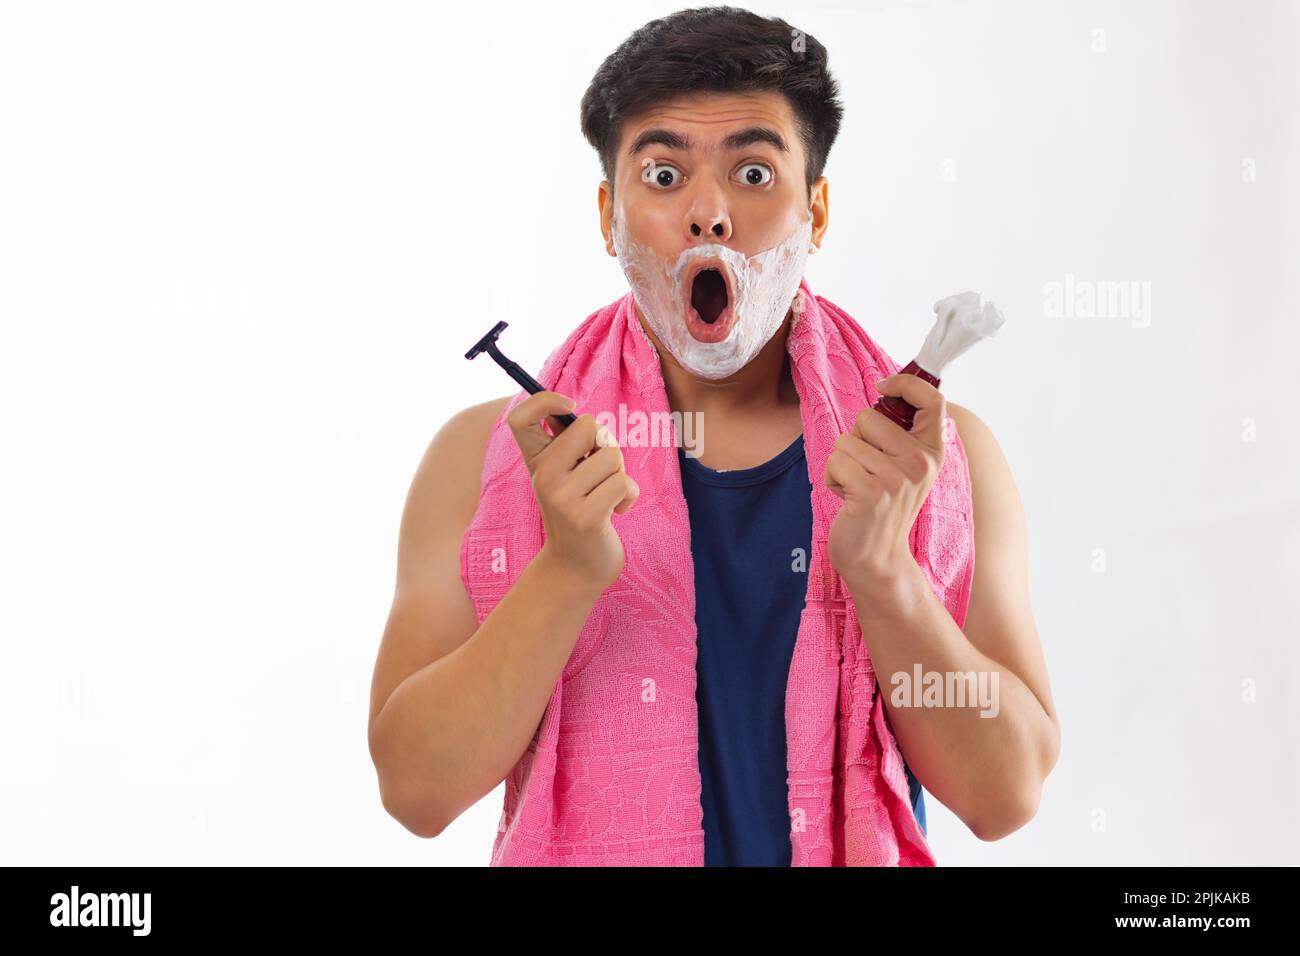 Portrait of surprised young boy looking at camera while shaving in bathroom Stock Photo